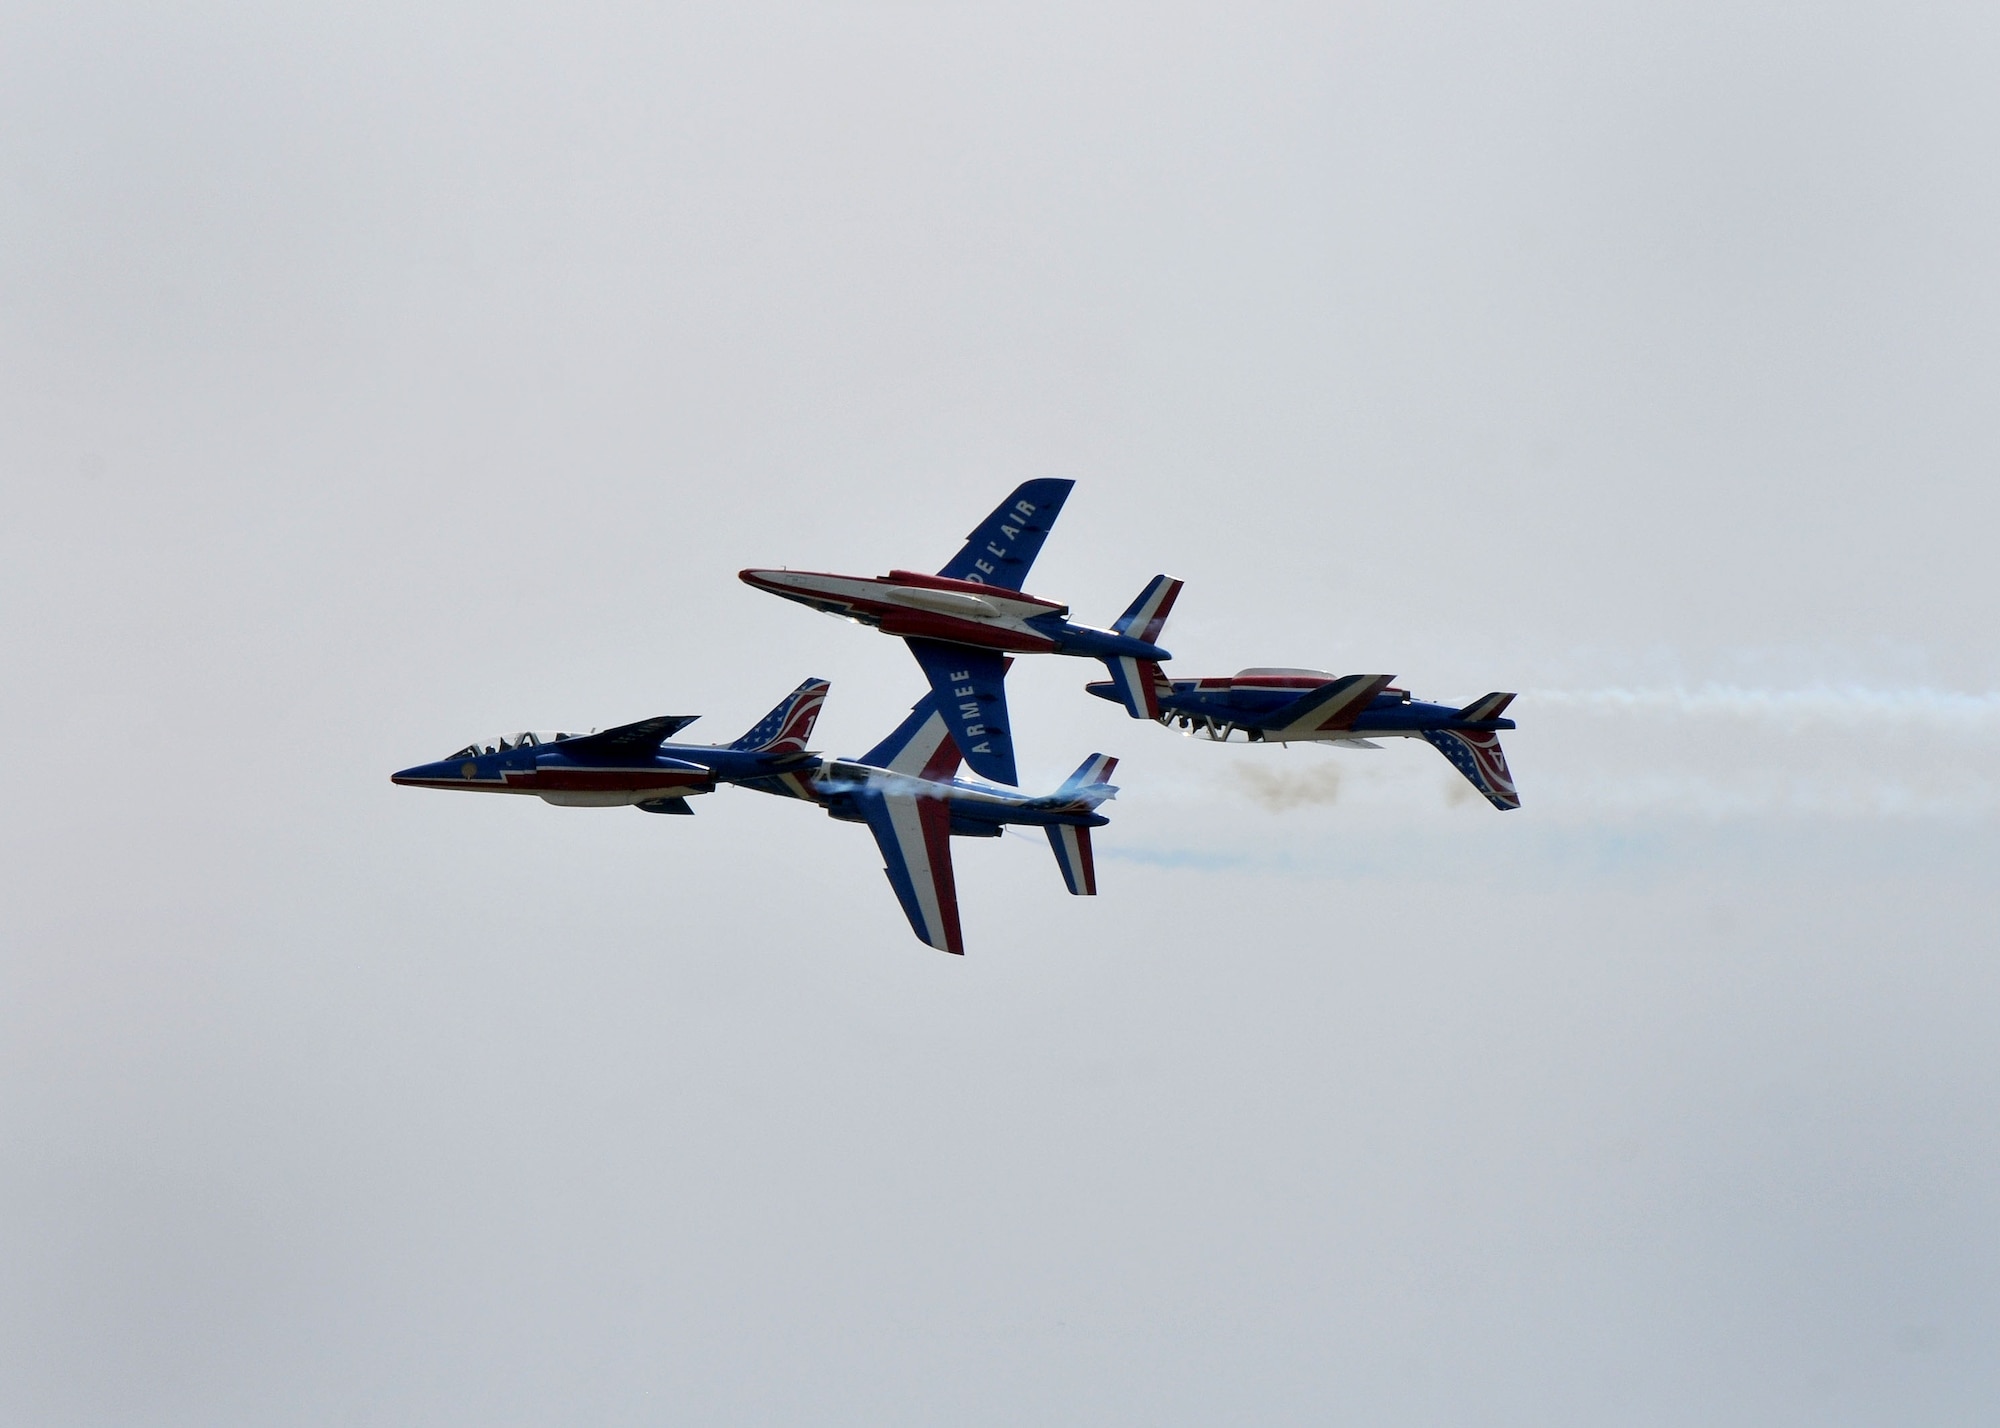 The Patrouille de France, an aerial demonstration team with the French Air Force, performs at Mather Air Field in Sacramento, California, April 15, 2017. The team consists of a commander and nine pilots along with 30 ground crew members. (U.S. Air Force photo/Staff Sgt. Rebeccah Anderson)